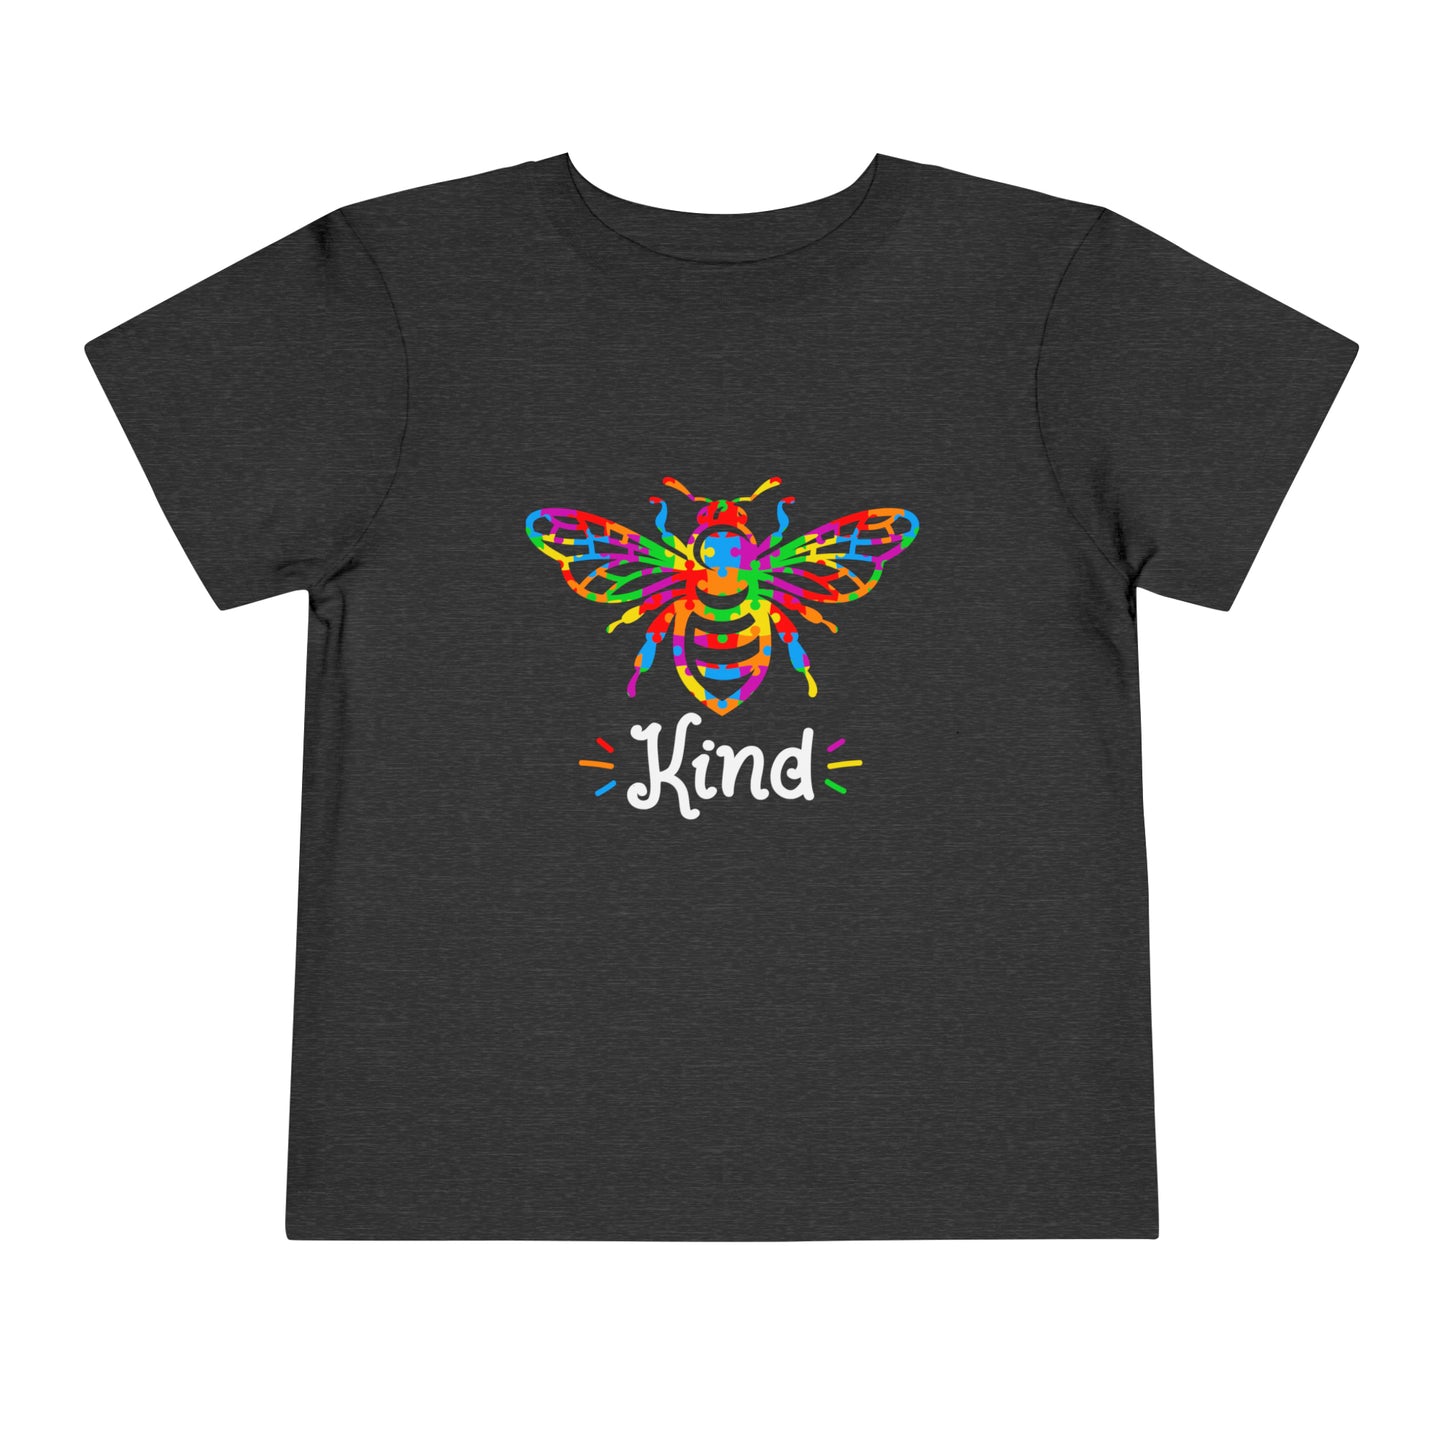 Be Kind Autism Advocate Toddler Short Sleeve Tee